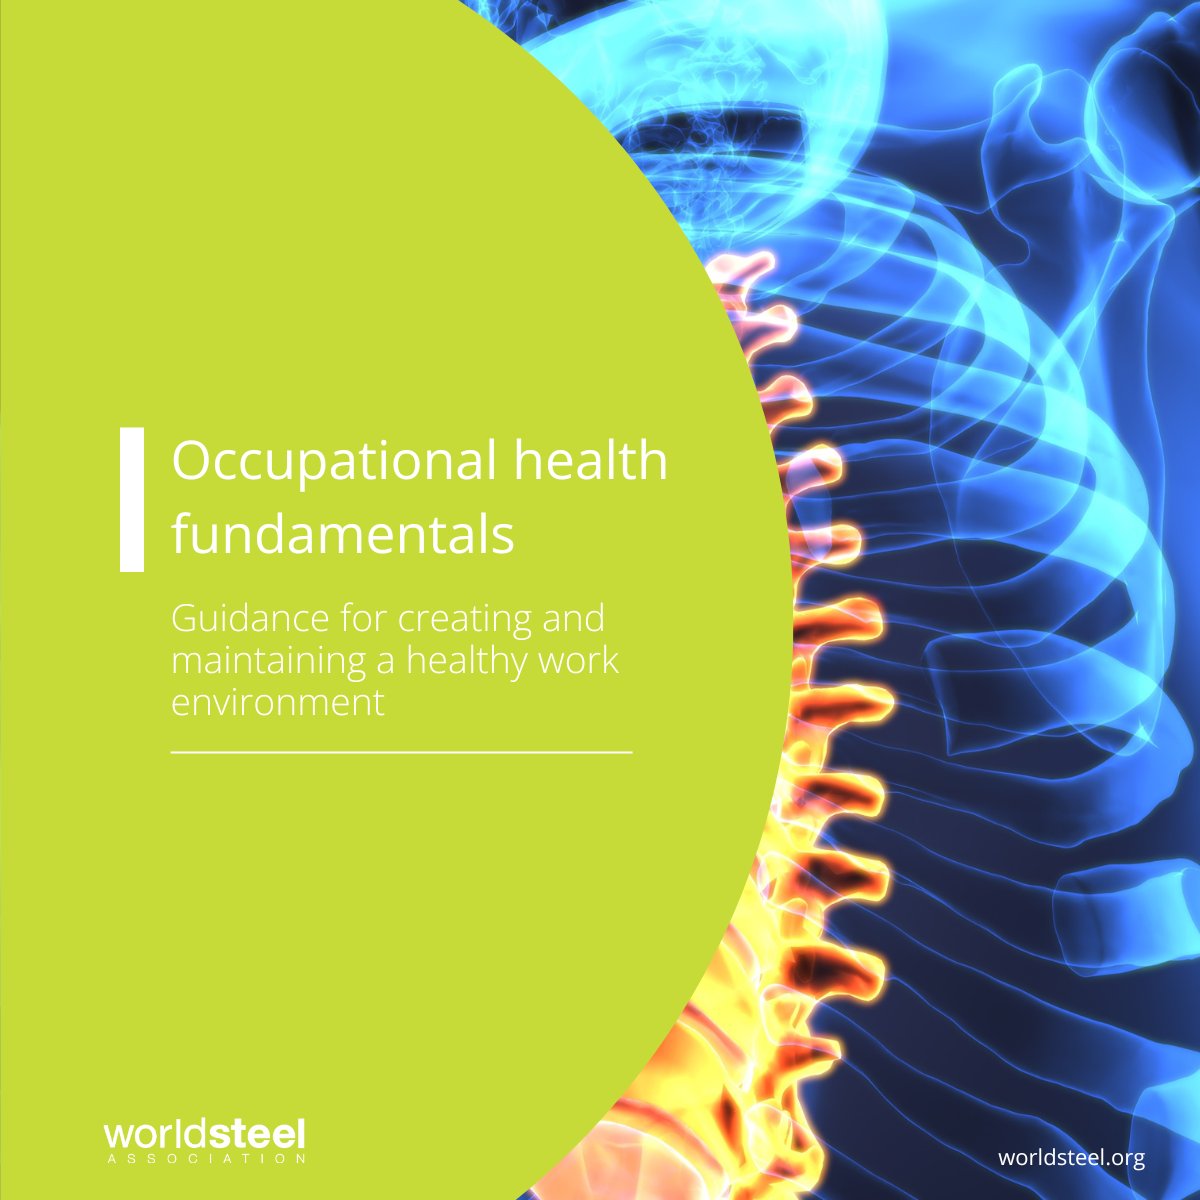 Every worker deserves a safe and healthy workplace. Learn the fundamental principles of occupational health in the steel industry. #steelSafetyandHealth ow.ly/acYU50Rrwxm